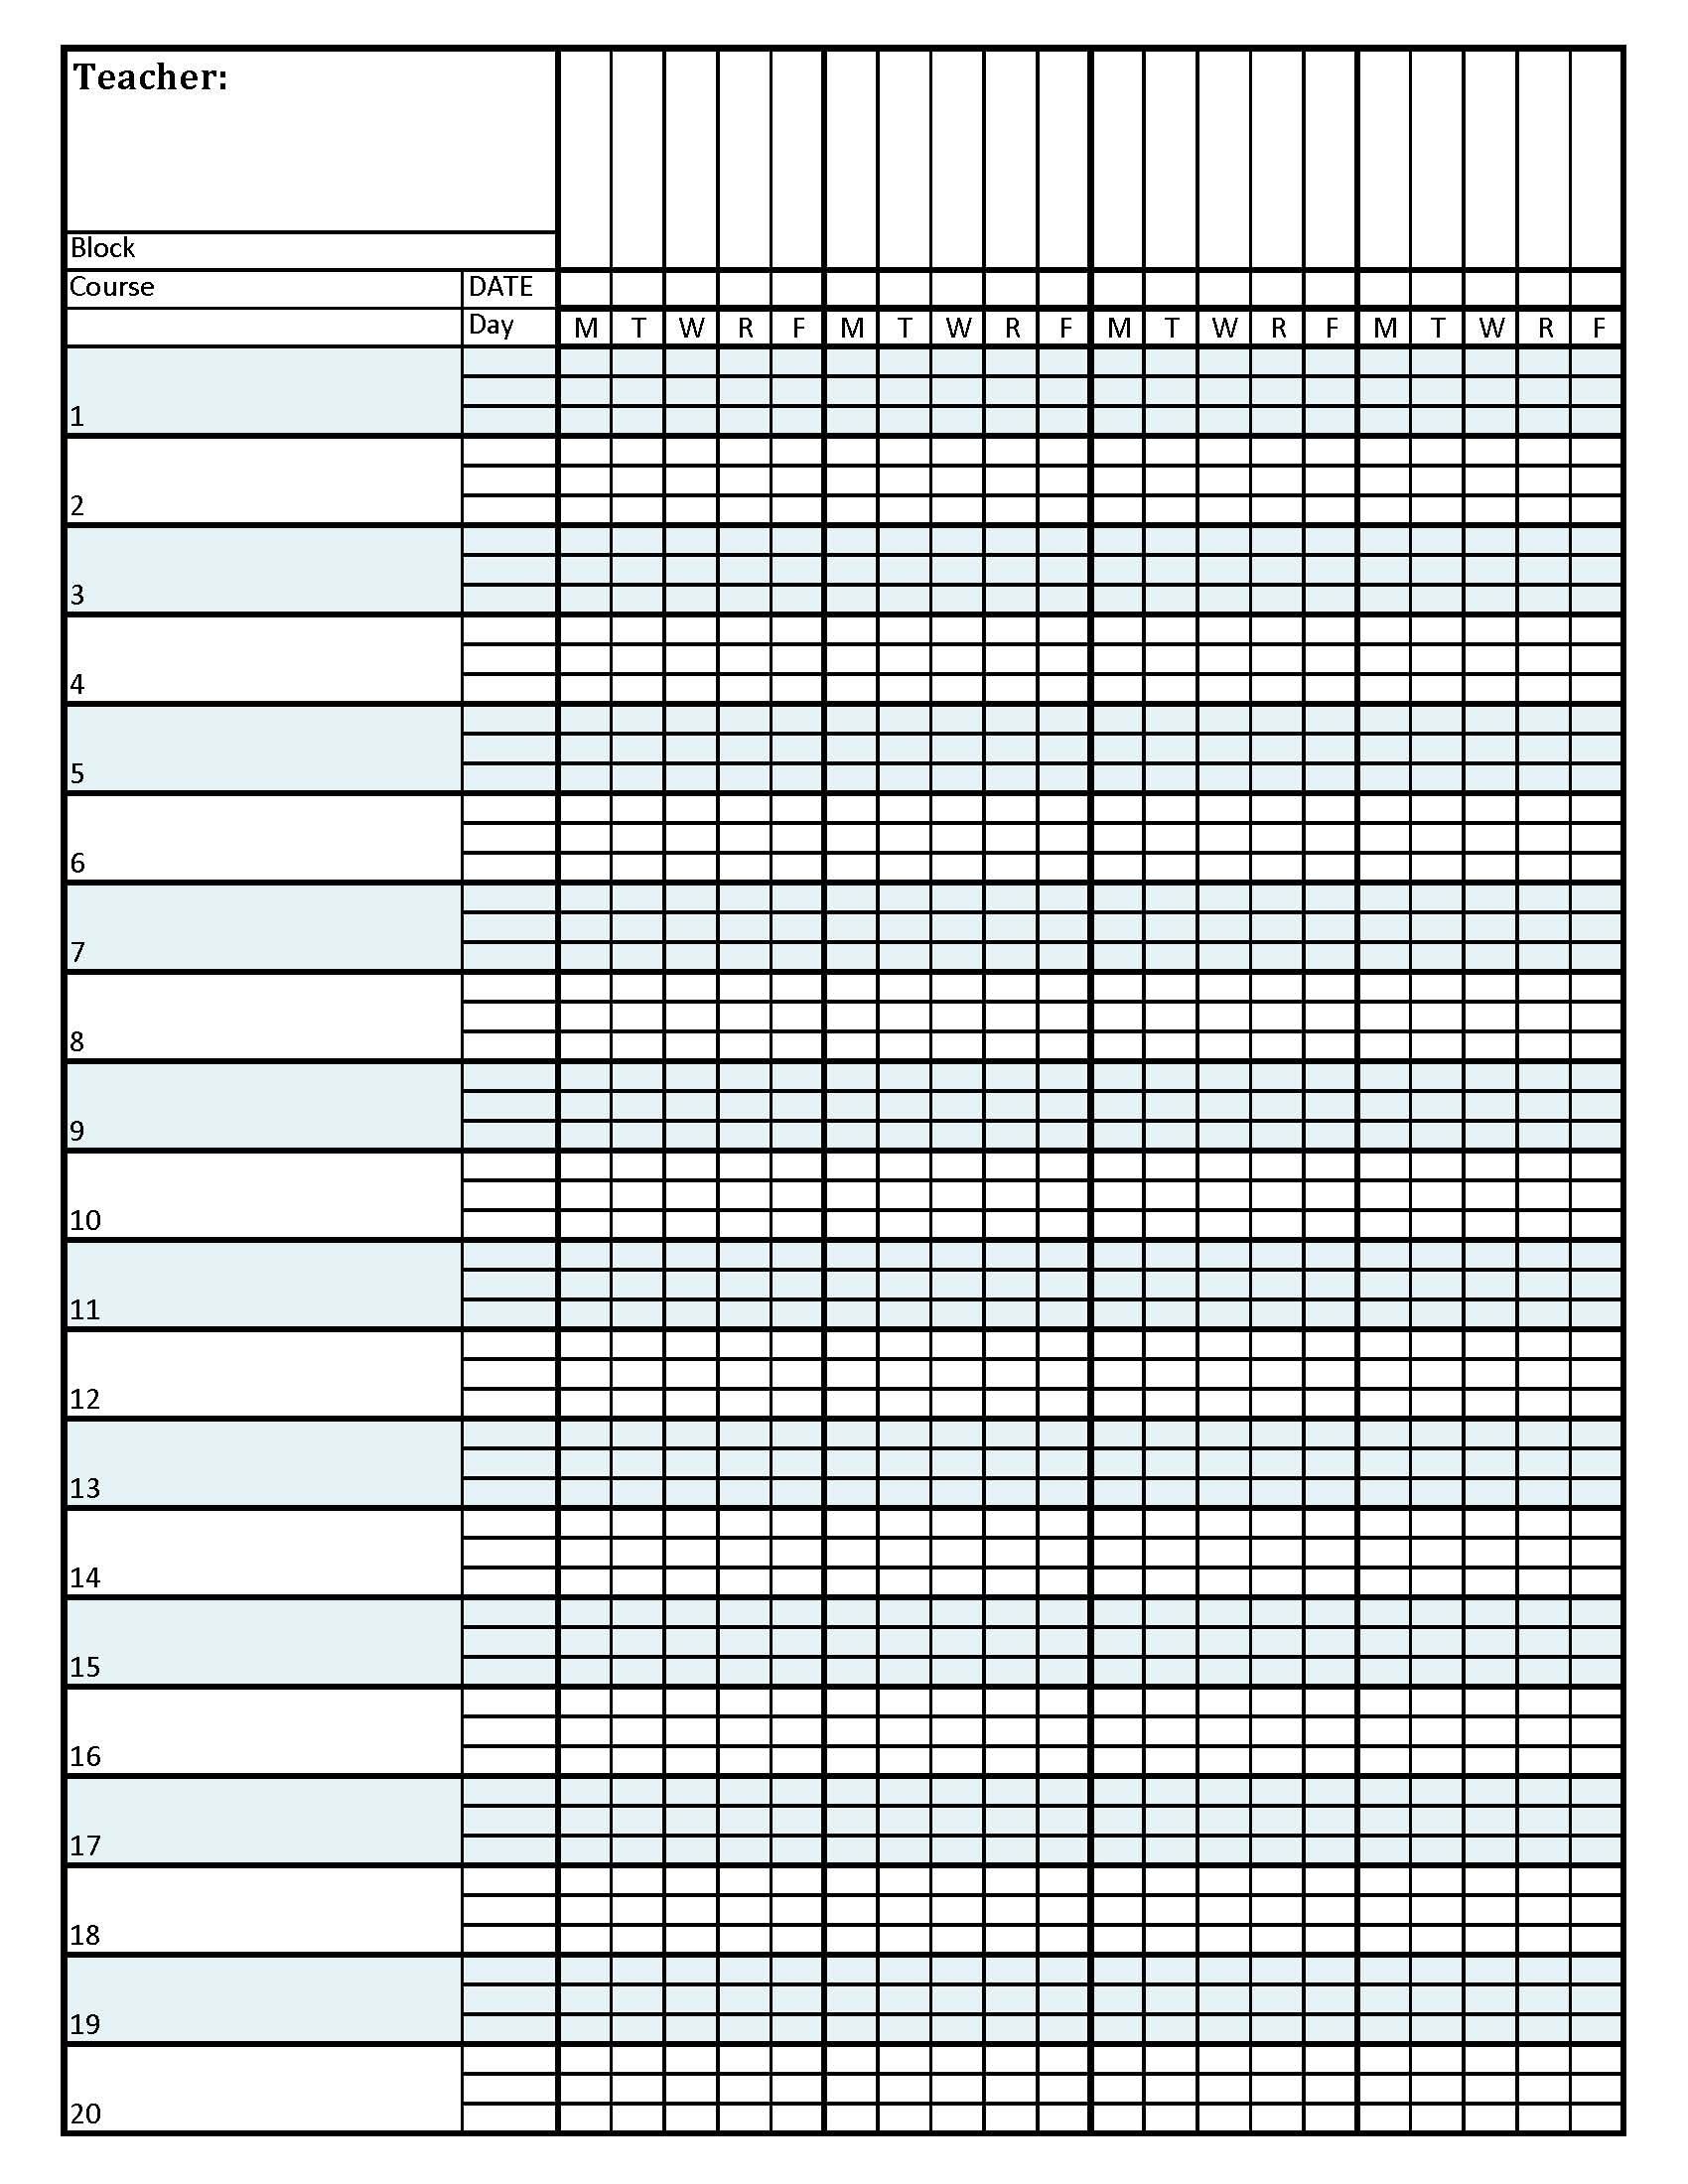 Free Printable Homework Assignment Sheets Free Printable A To Z